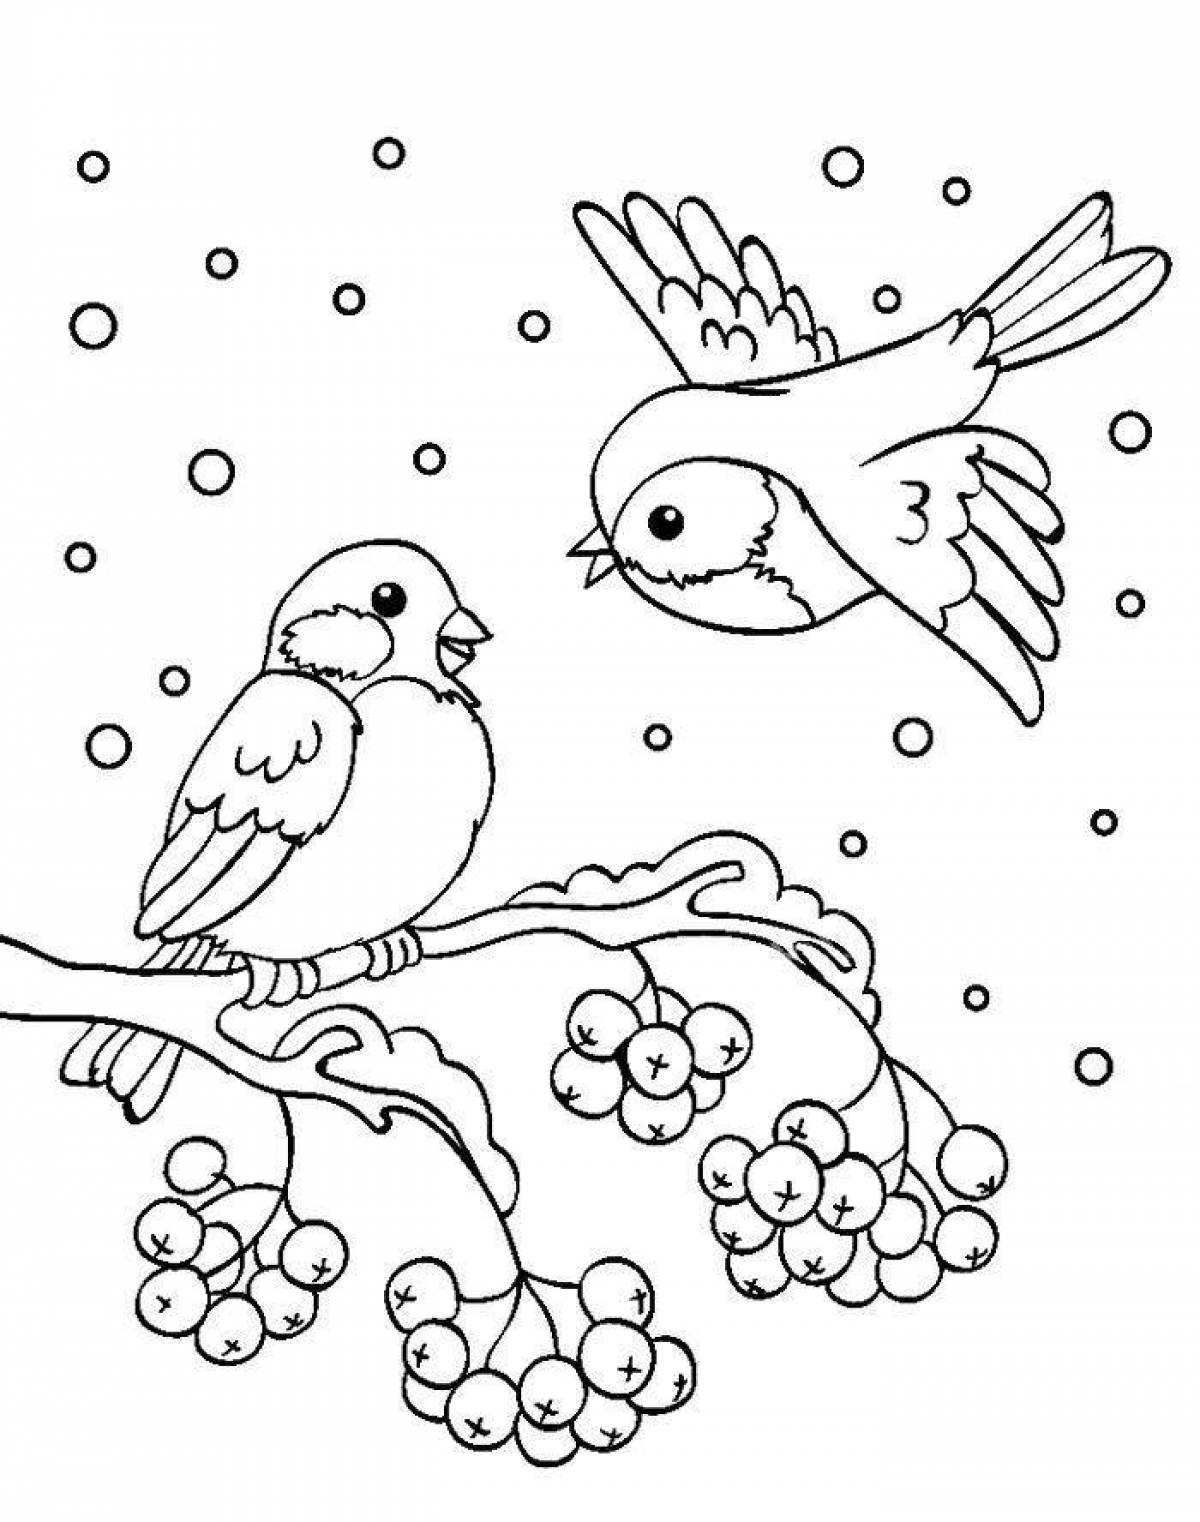 Impressive bullfinch coloring book for kids 4-5 years old